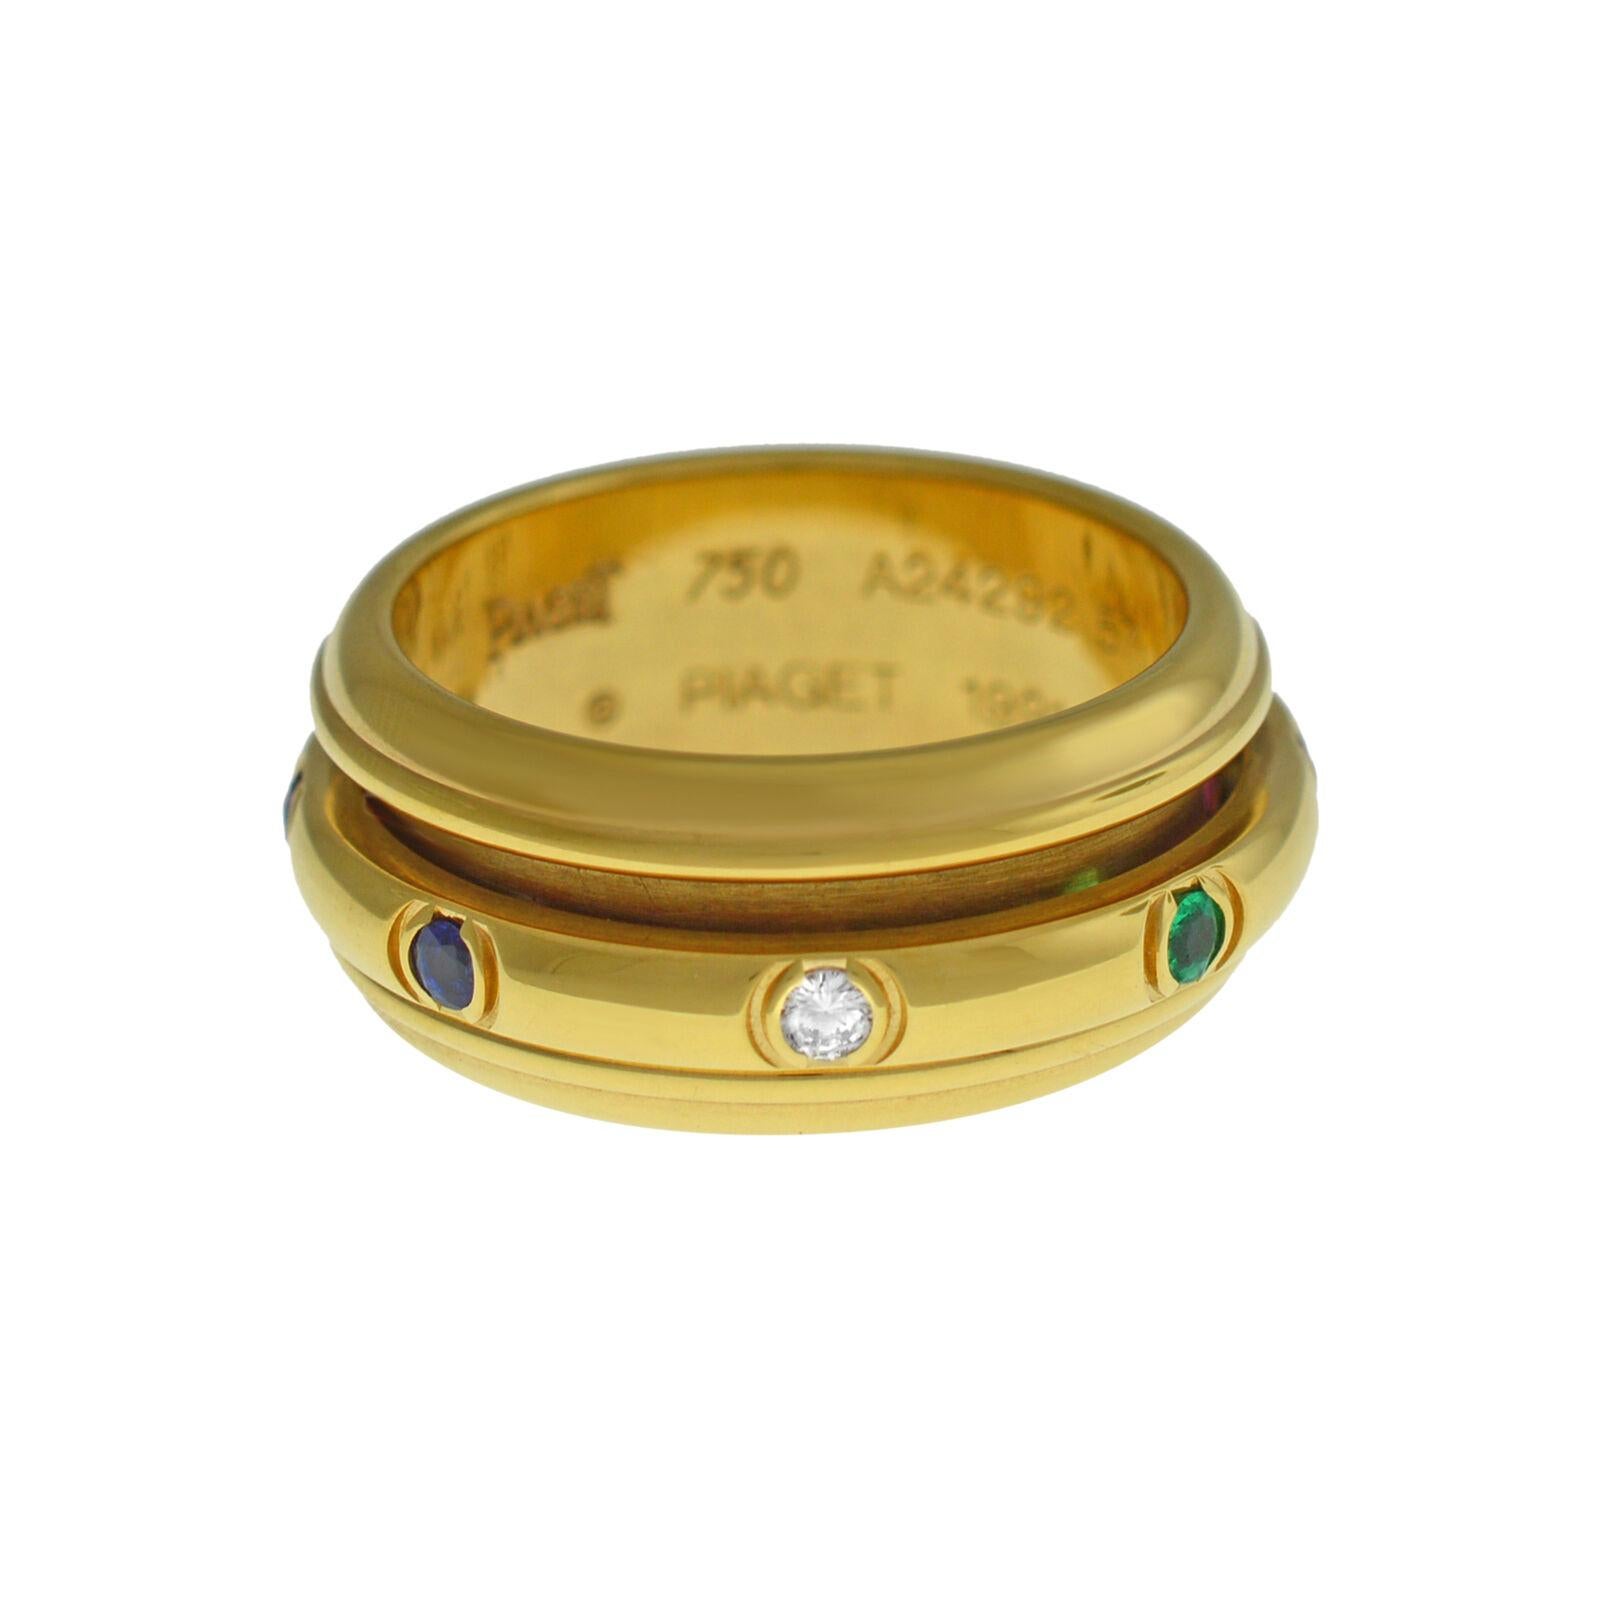 Brand	Piaget
Model	Possession
Gender	Ladies
Condition	New Old Stock
Metal 	18K Yellow Gold
Metal Weight	15 gr.	
8.25 size
 This stunning Rotating Double Piaget ring is made from 18K Yellow Gold weighting at 15 gr. and has 2 diamonds, 3 emeralds, 2